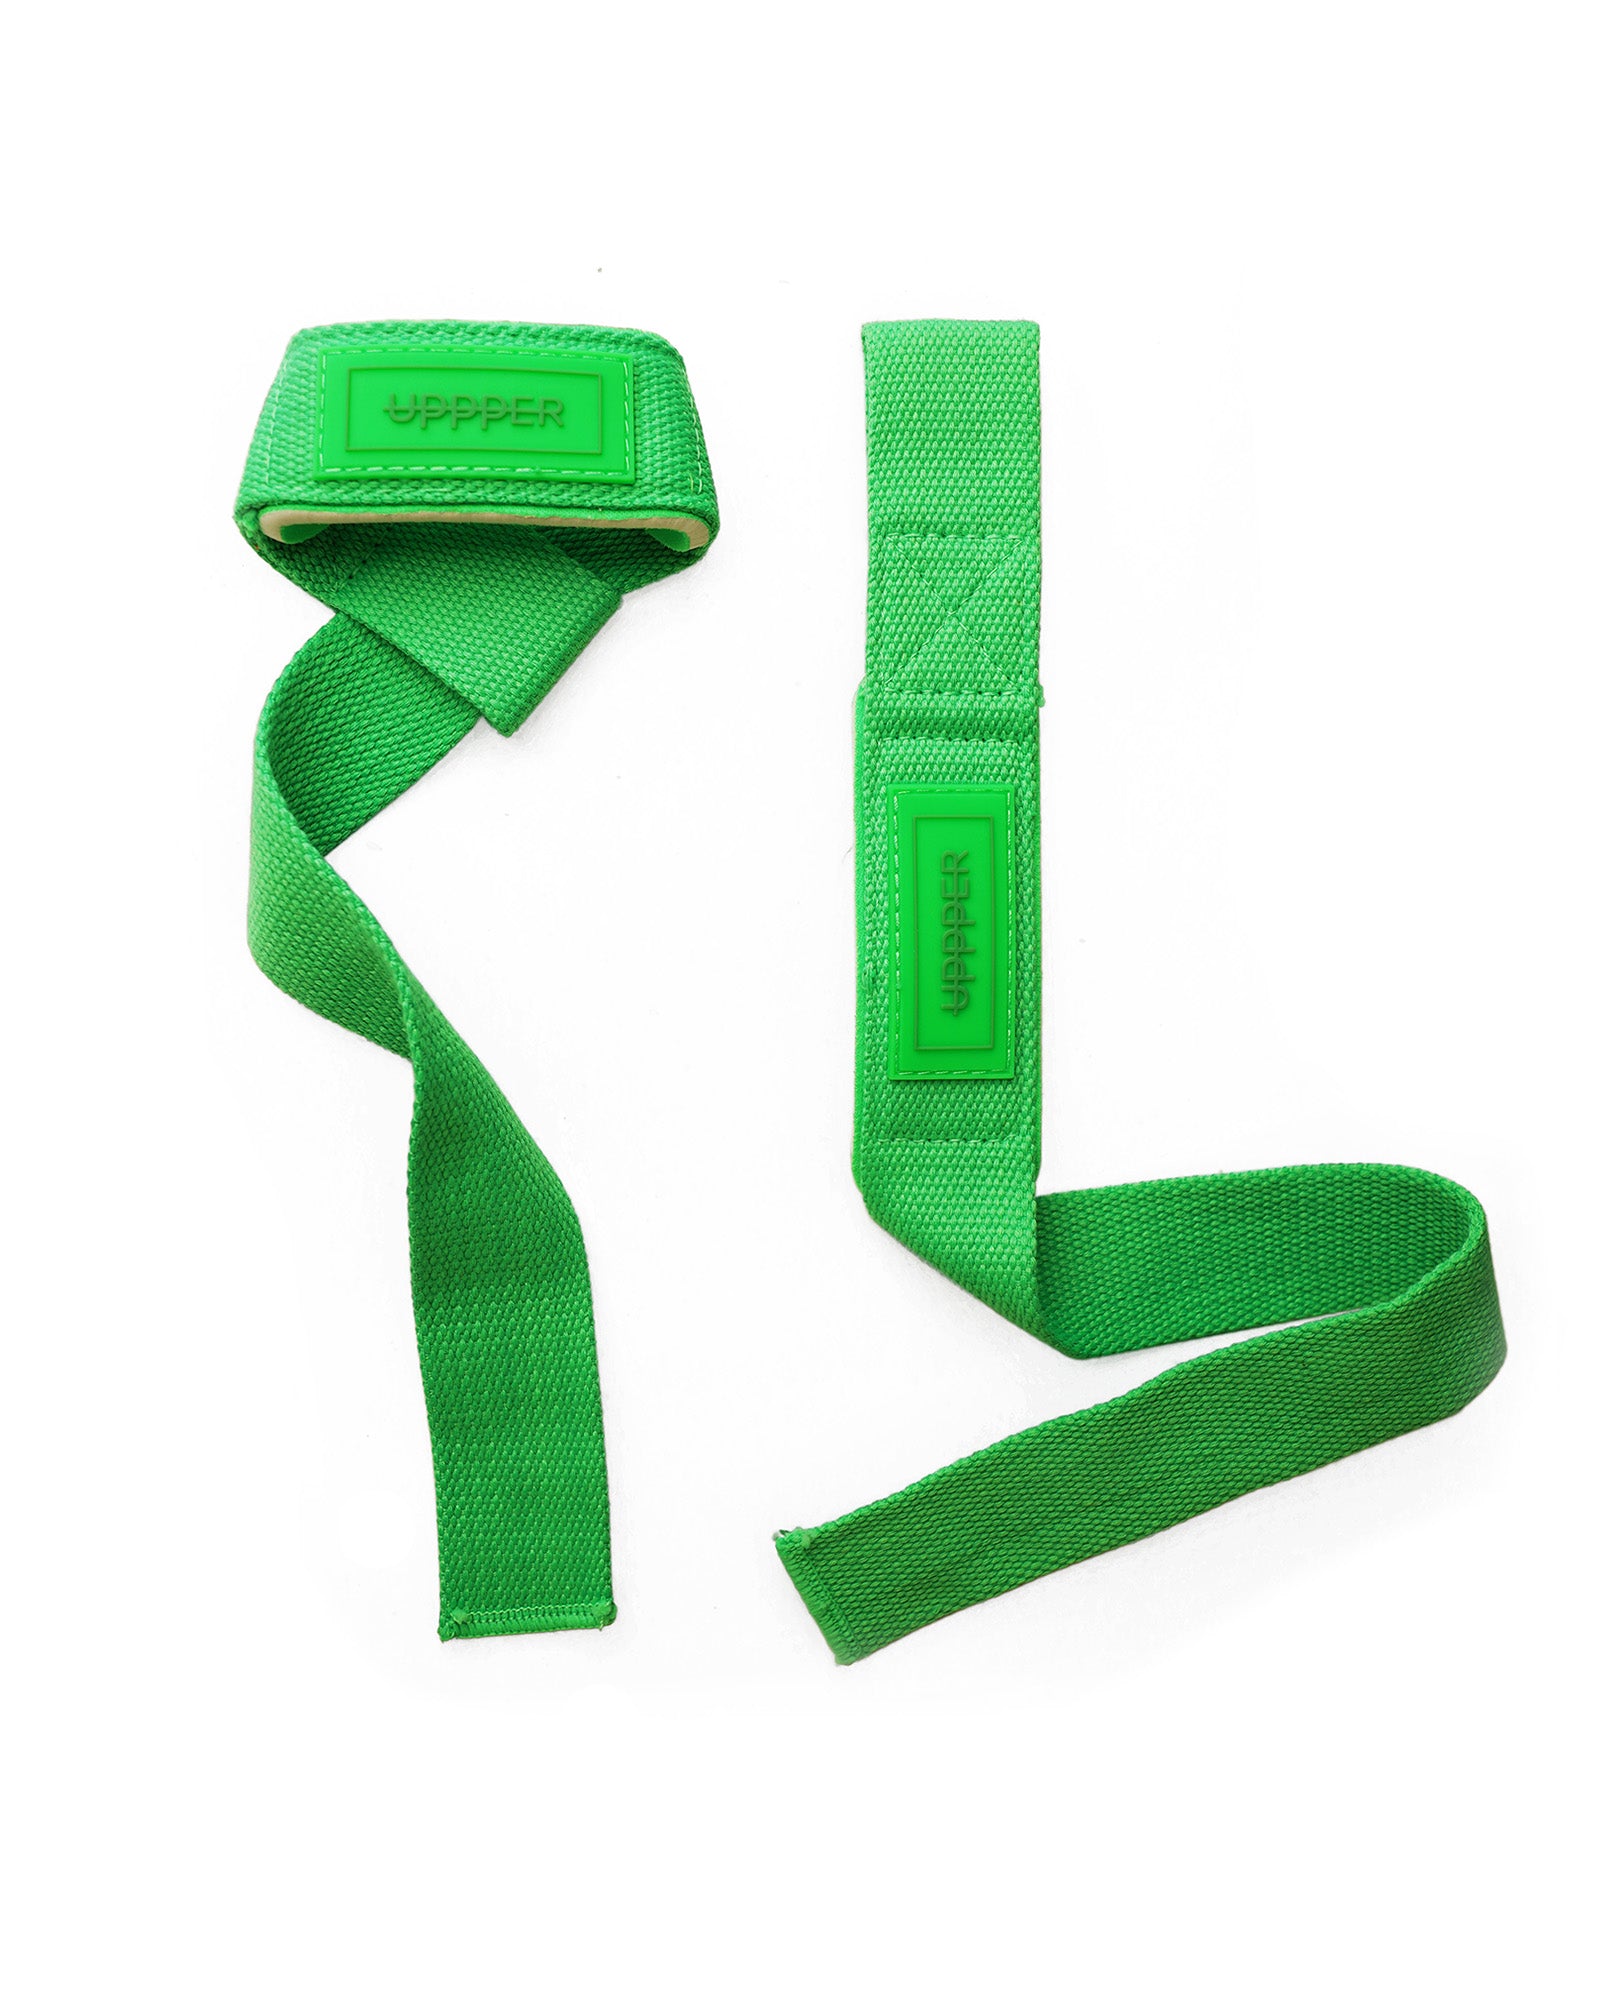 UPPPER Lifting Straps For Weightlifting | Premium Fitness Gear – UPPPER ...